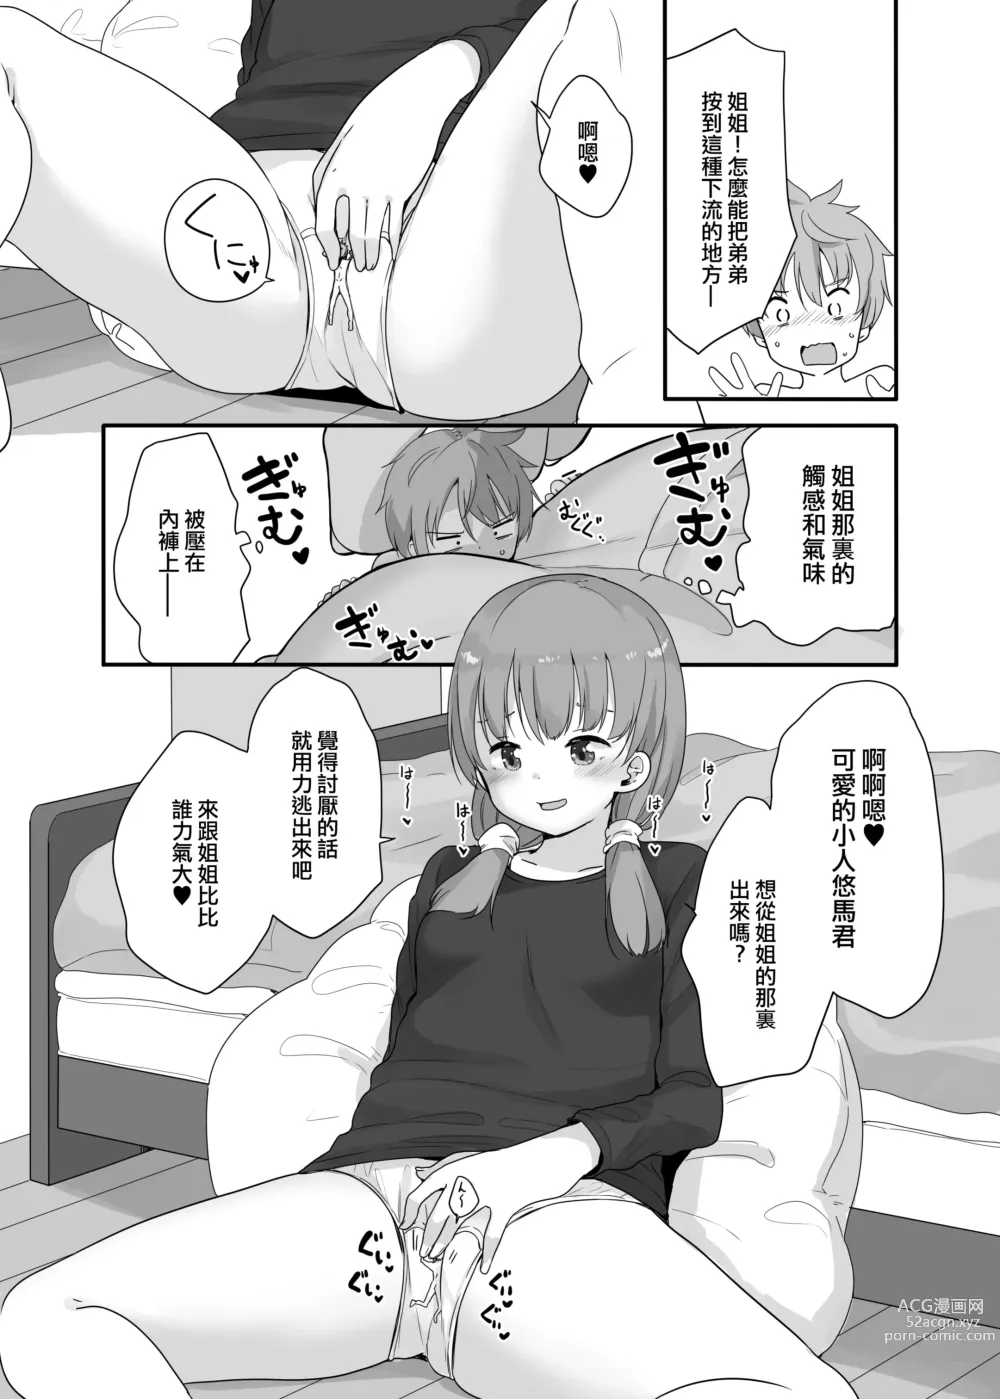 Page 11 of doujinshi Little Sister With Grande Everyday 3